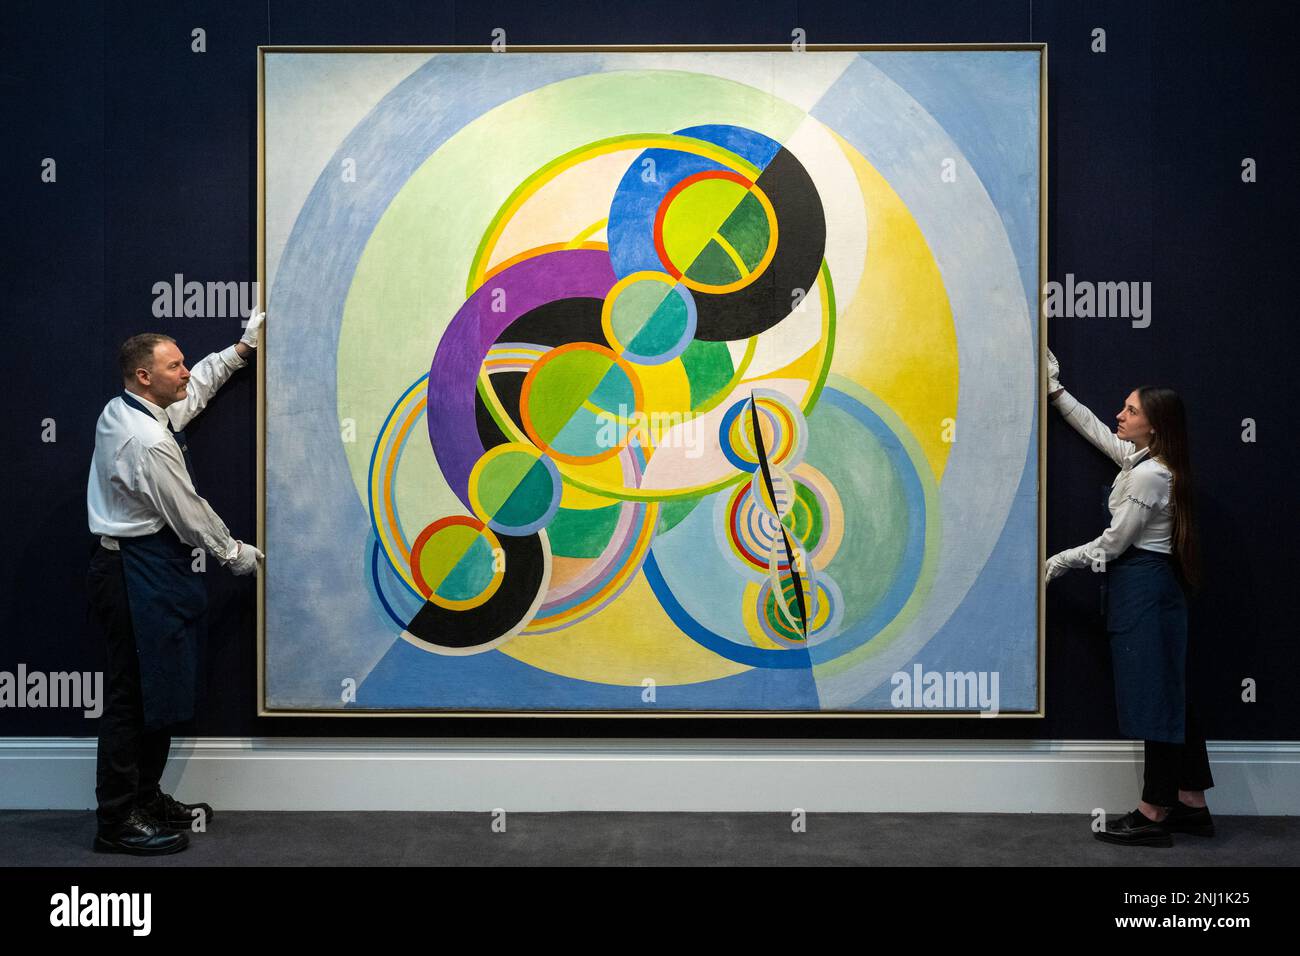 London, UK.  22 February 2023. Technicians present 'Rythme circulaire' by Robert Delaunay (Est. £7,000,000 - 10,000,000)at a preview of highlights from Sotheby’s upcoming Modern & Contemporary Evening sale featuring works by Kandinsky, Picasso, Richter and Munch.  The sale takes place at Sotheby’s New Bond Street galleries on 1 March 2023. Credit: Stephen Chung / Alamy Live News Stock Photo